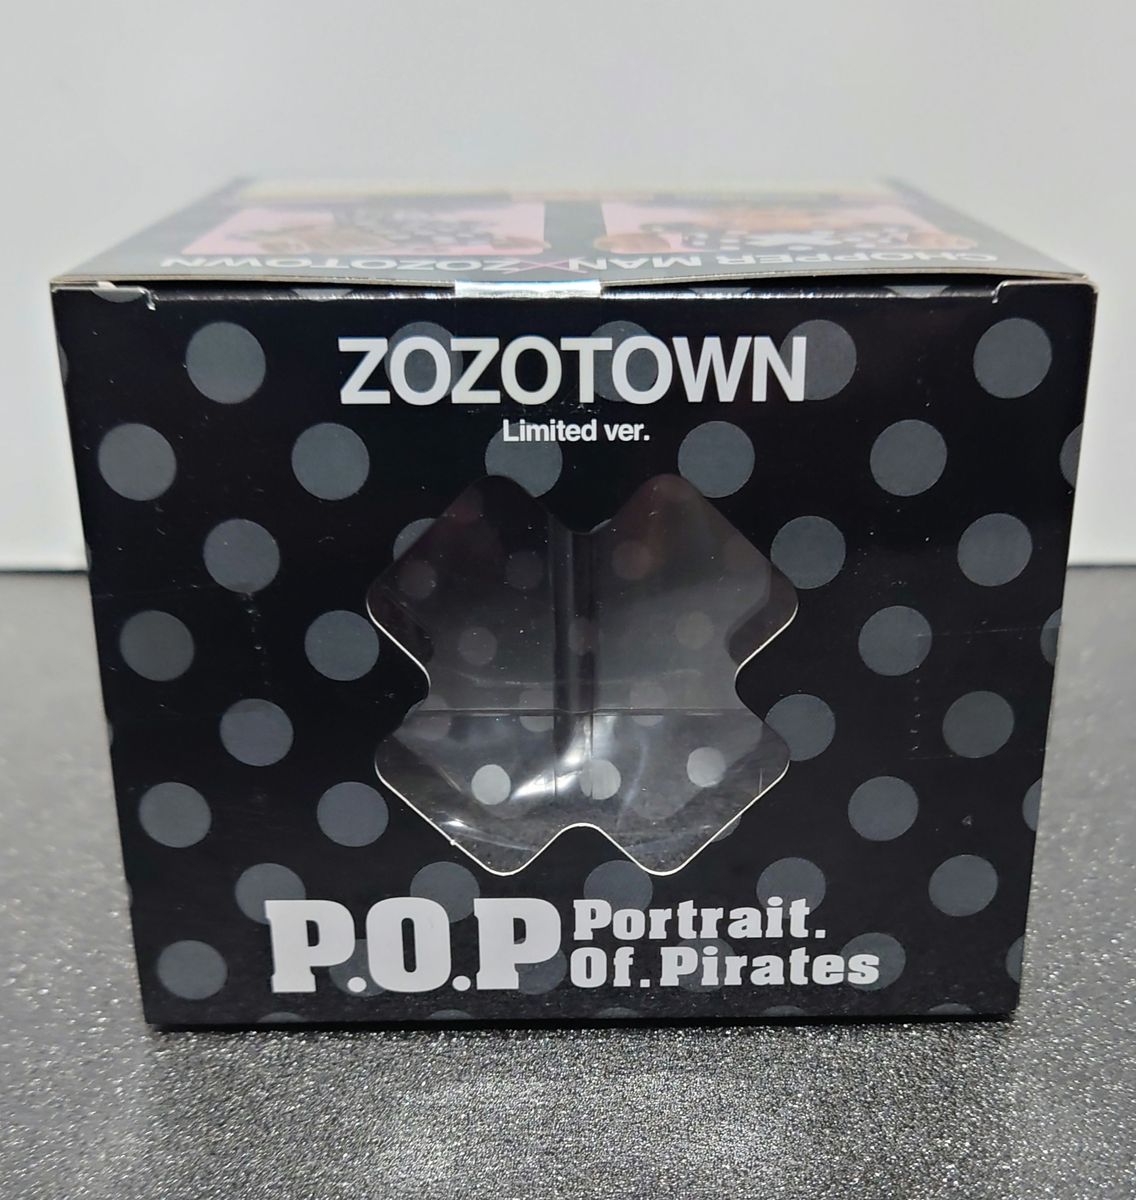 P.O.P.チョッパーマン ZOZOTOWN Limited ver.